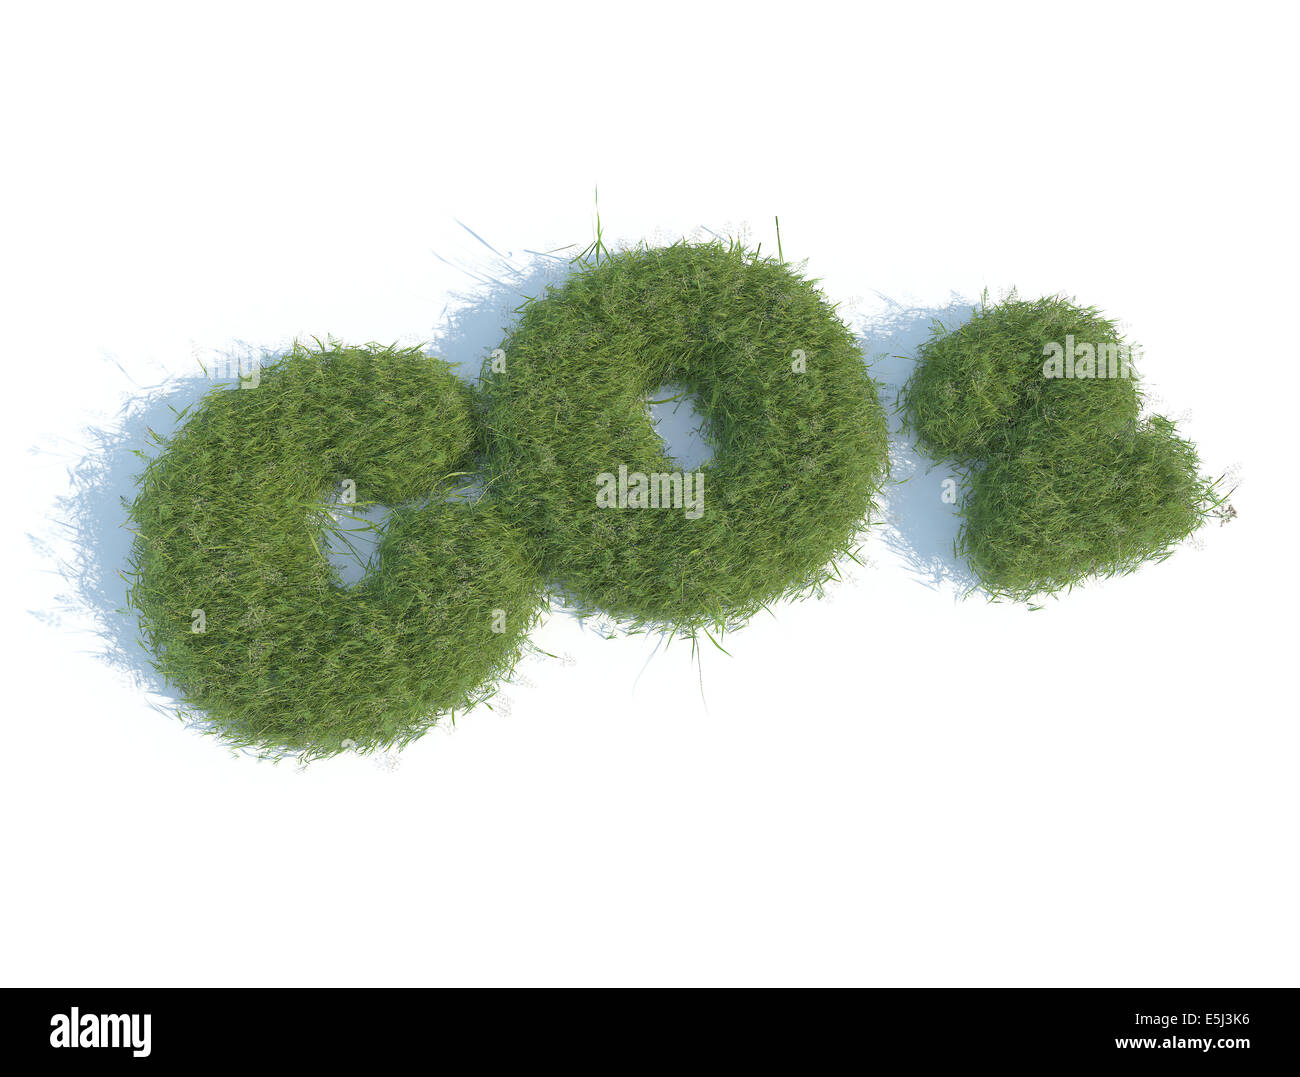 Co2 - Carbon dioxide text covered in grass Stock Photo